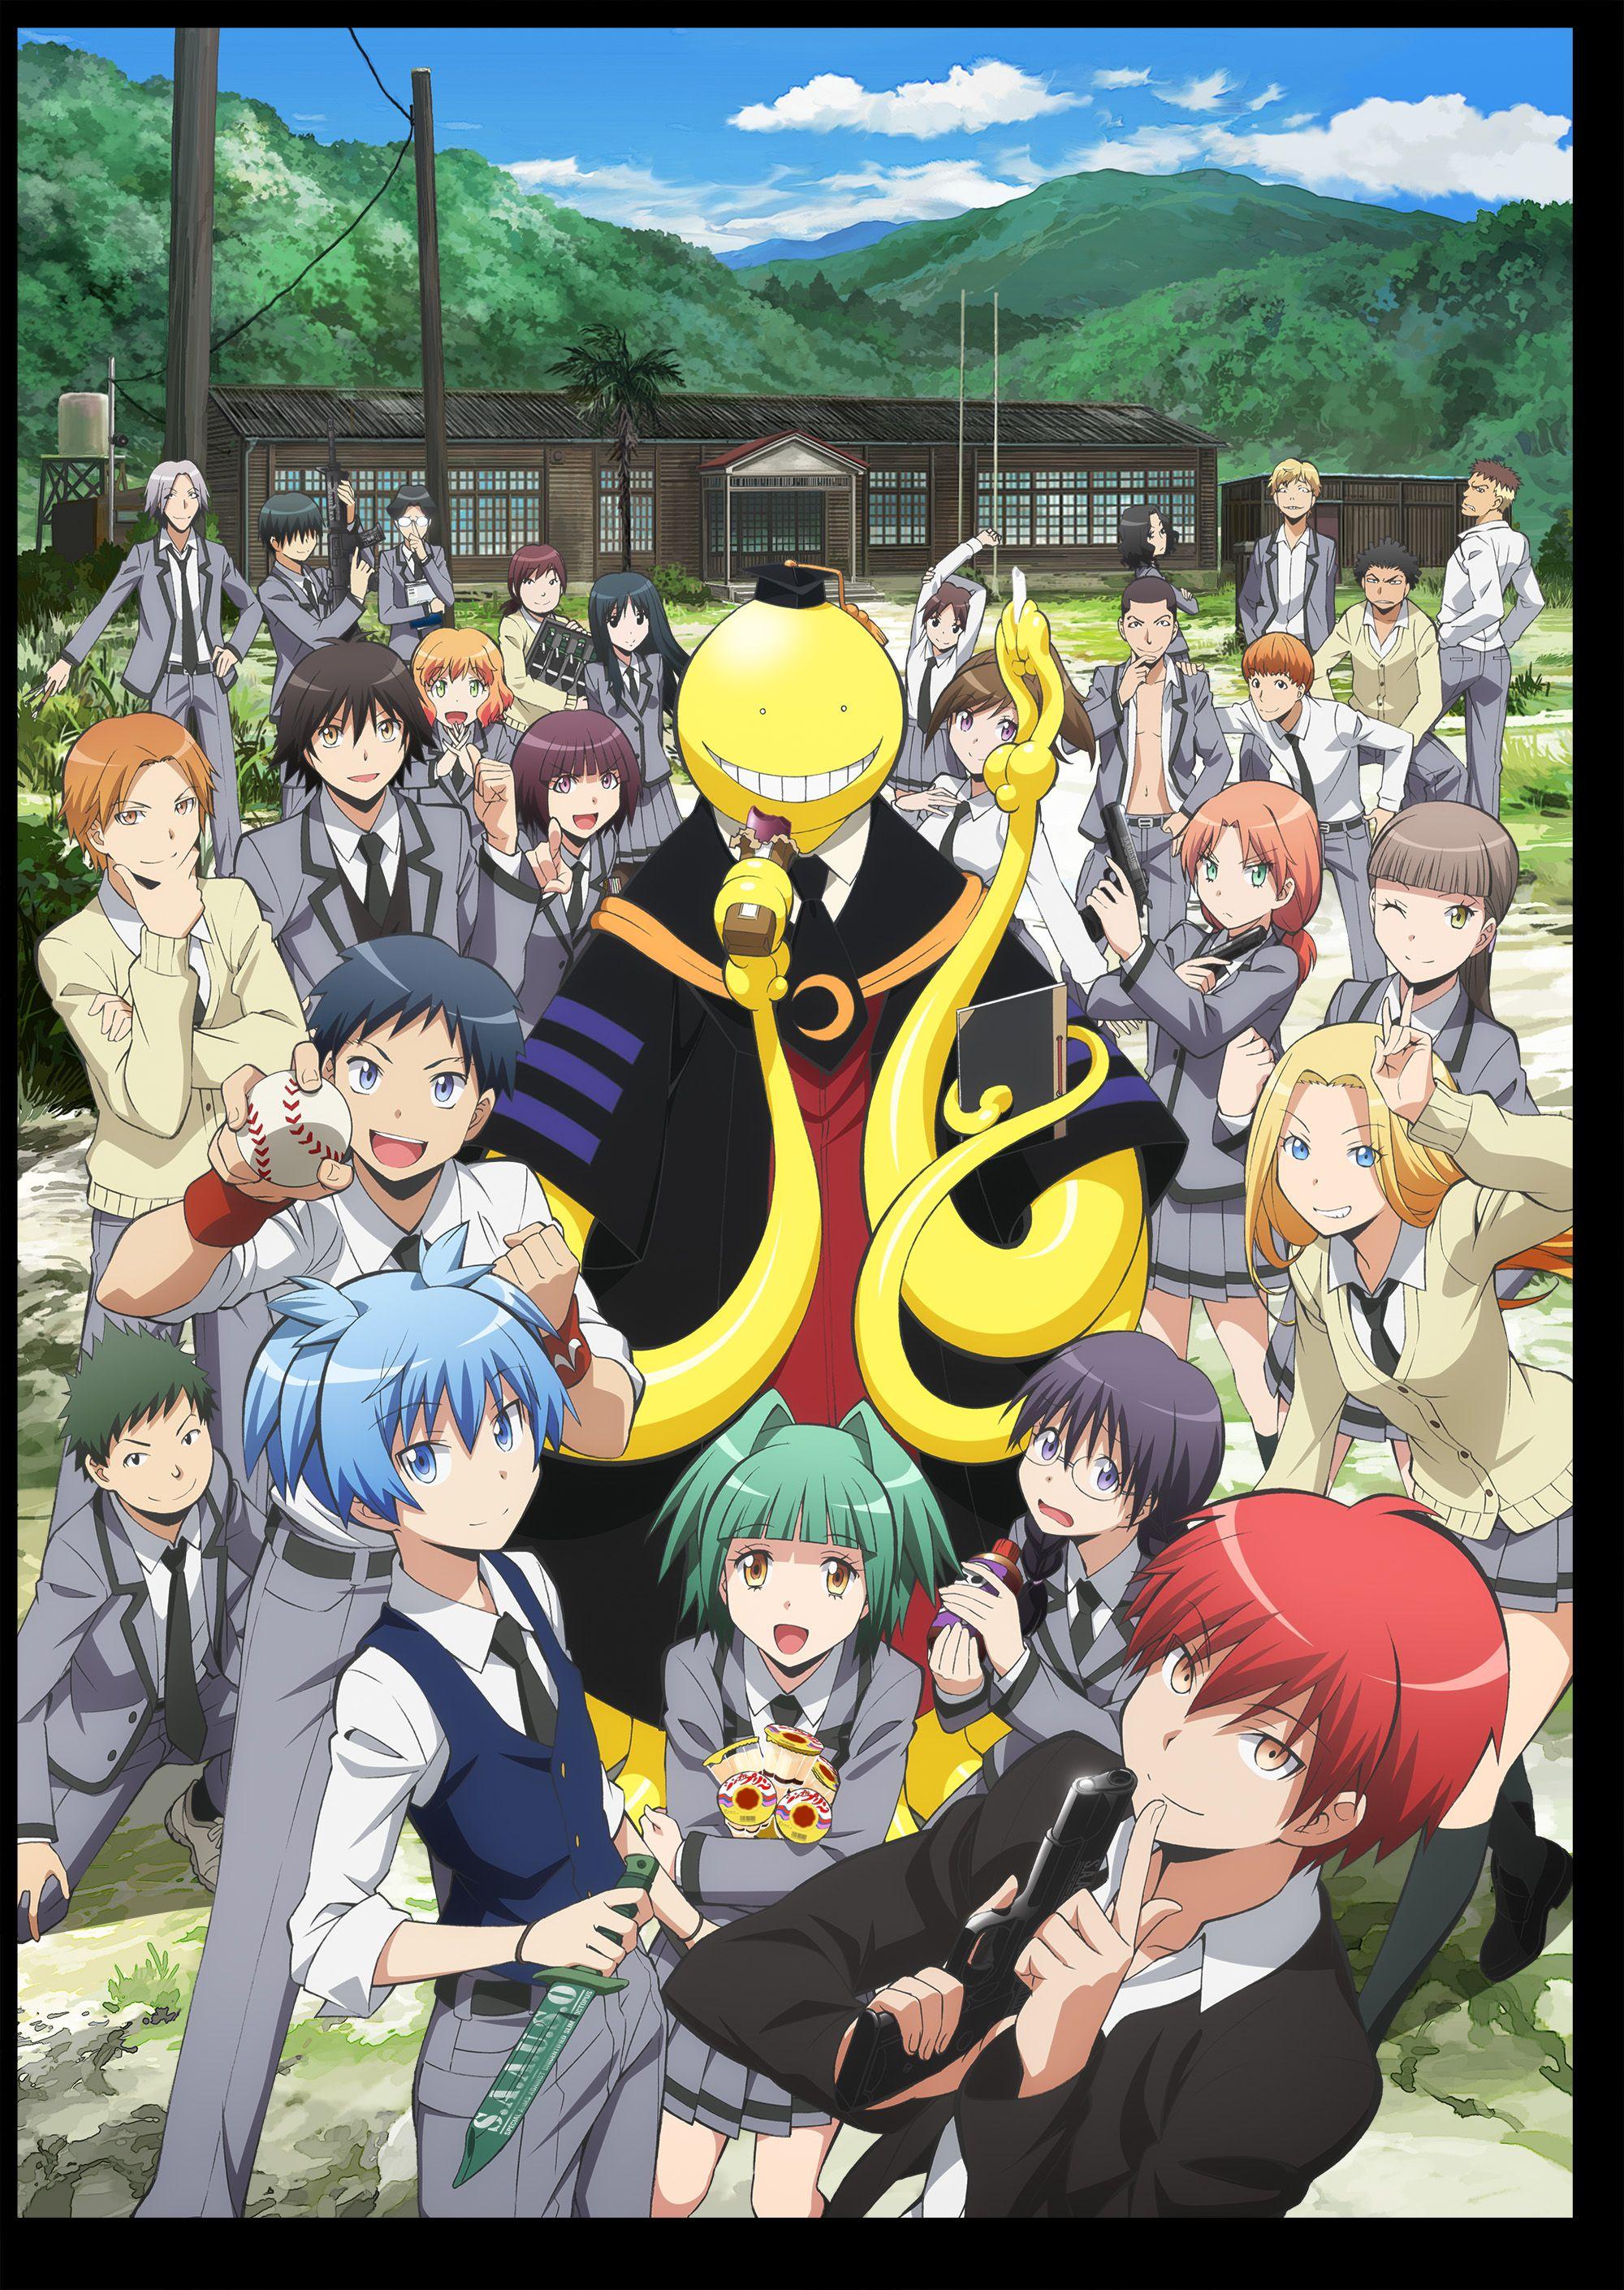 Assassination Classroom Iphone Wallpapers Top Free Assassination Classroom Iphone Backgrounds Wallpaperaccess